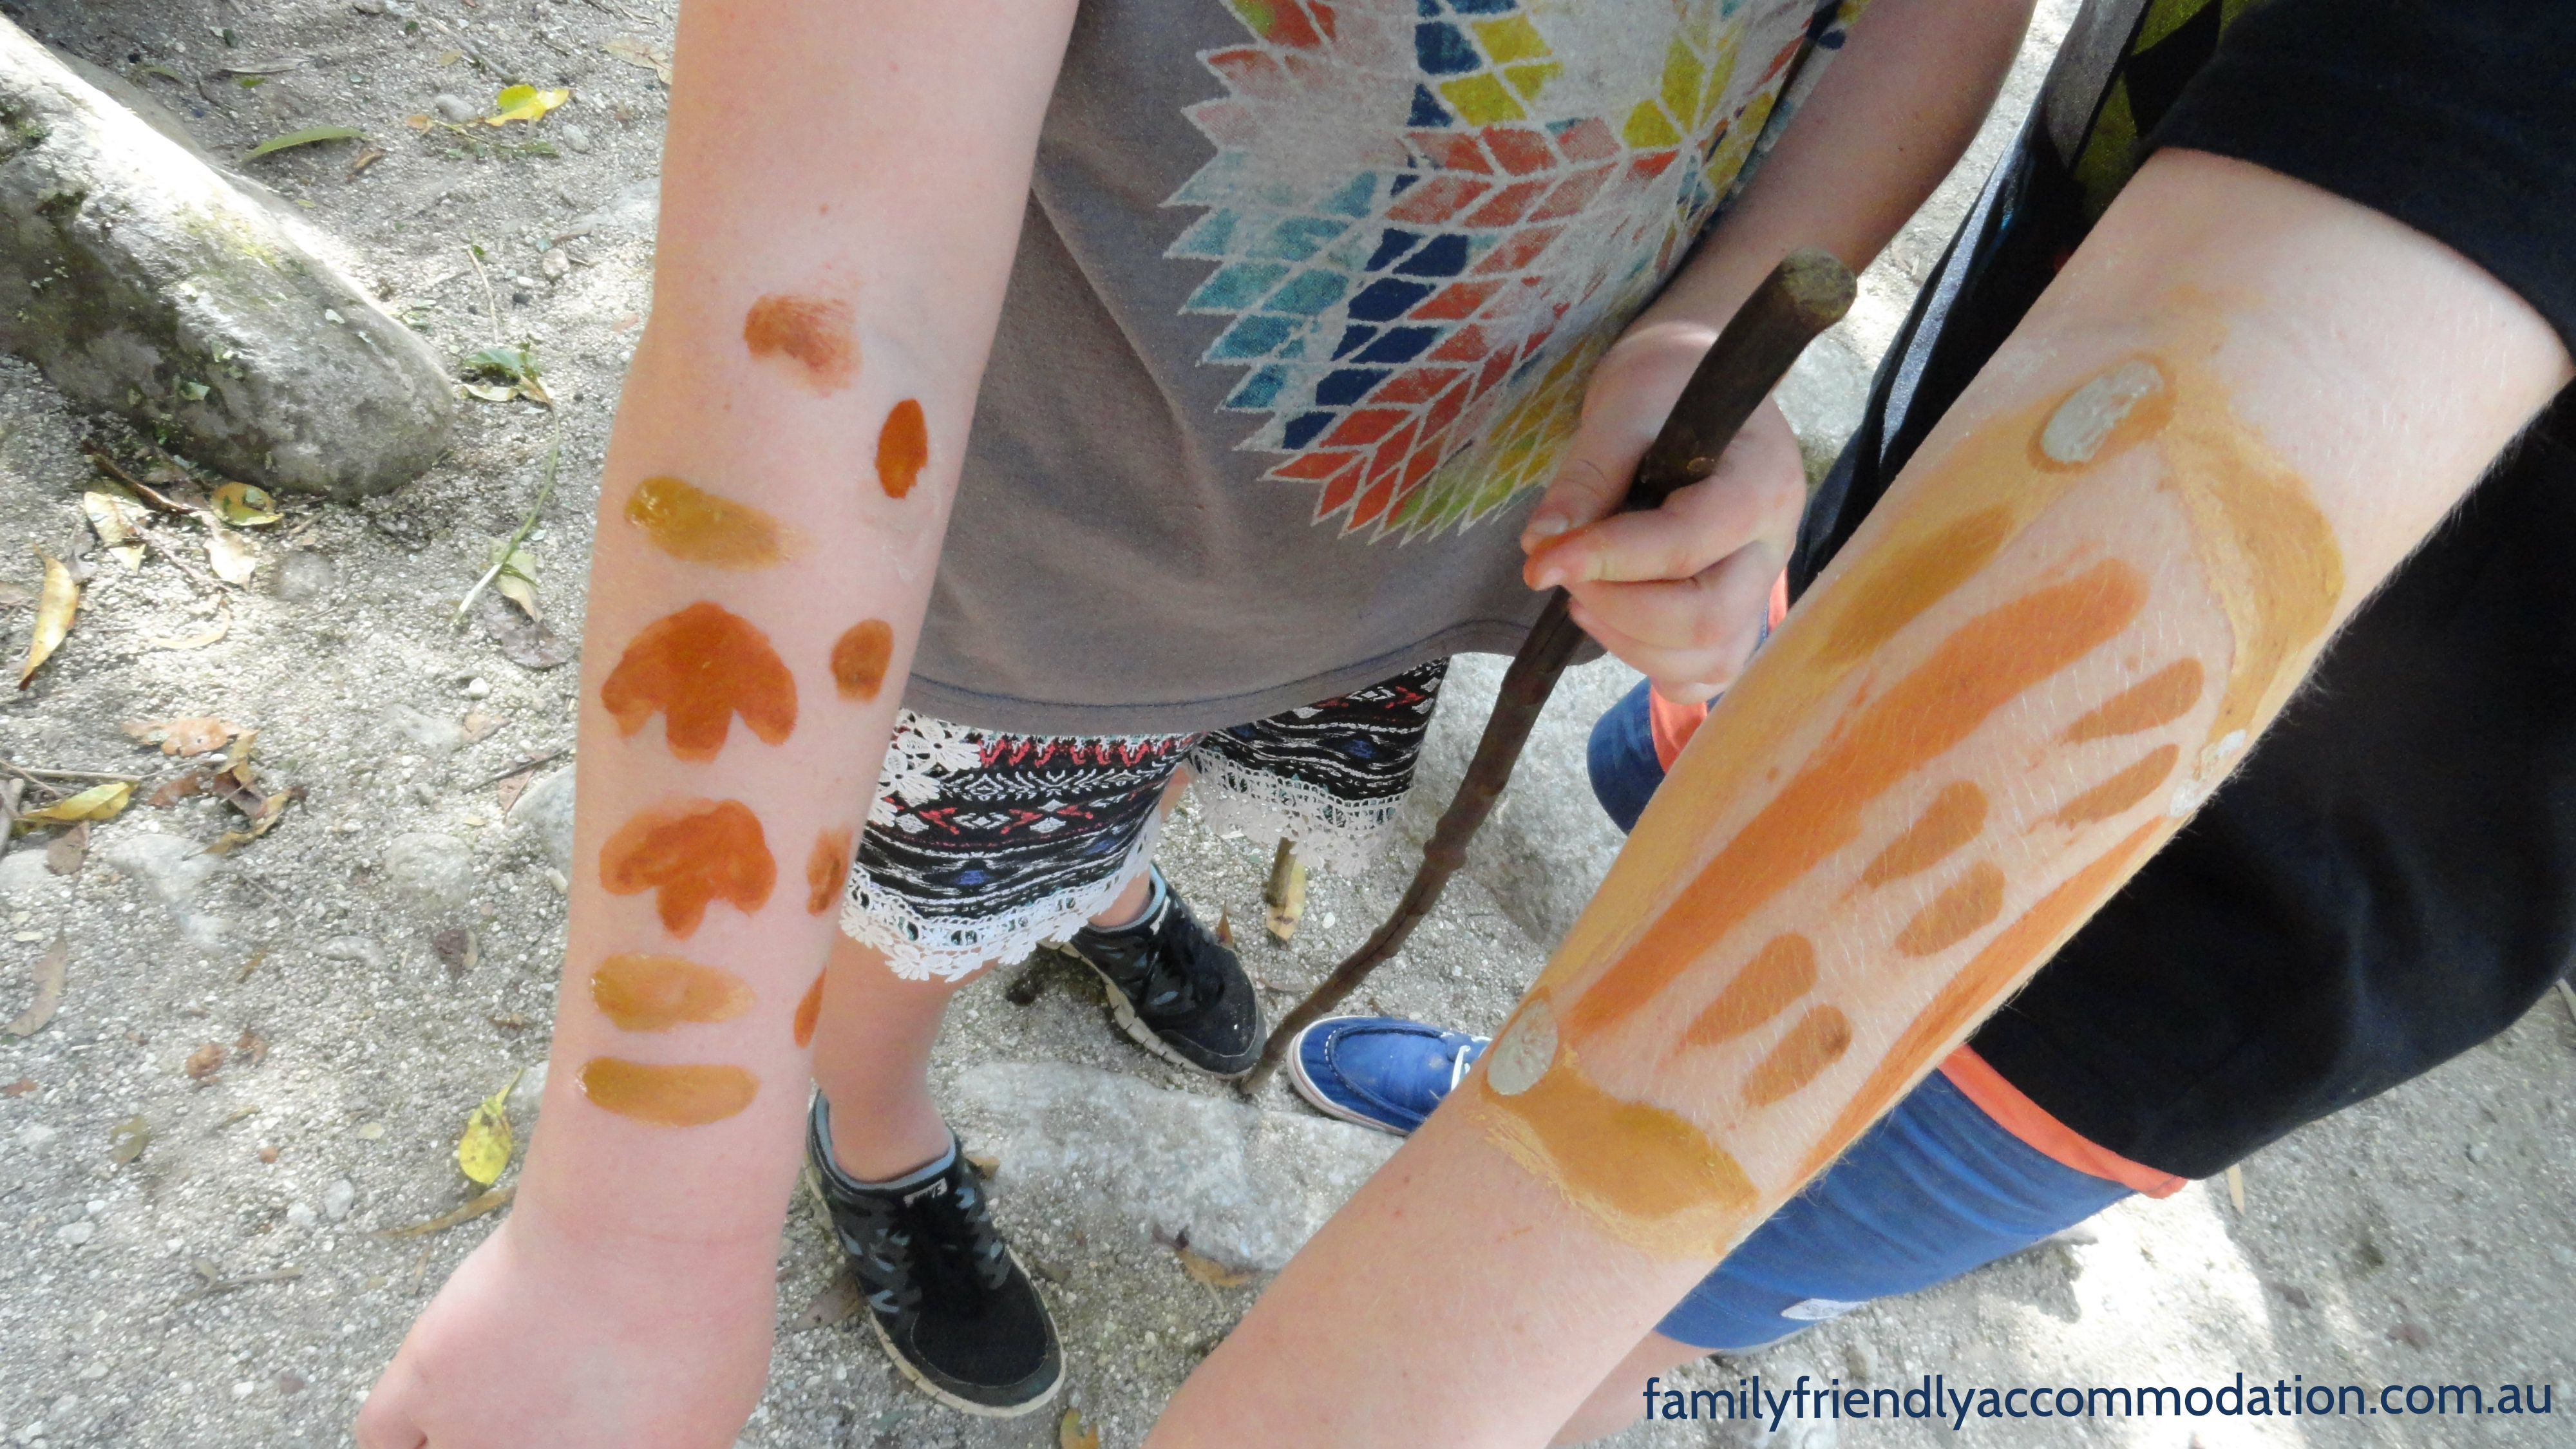 Learning body art on the Dreamtime Walking tour at Mossman Gorge.